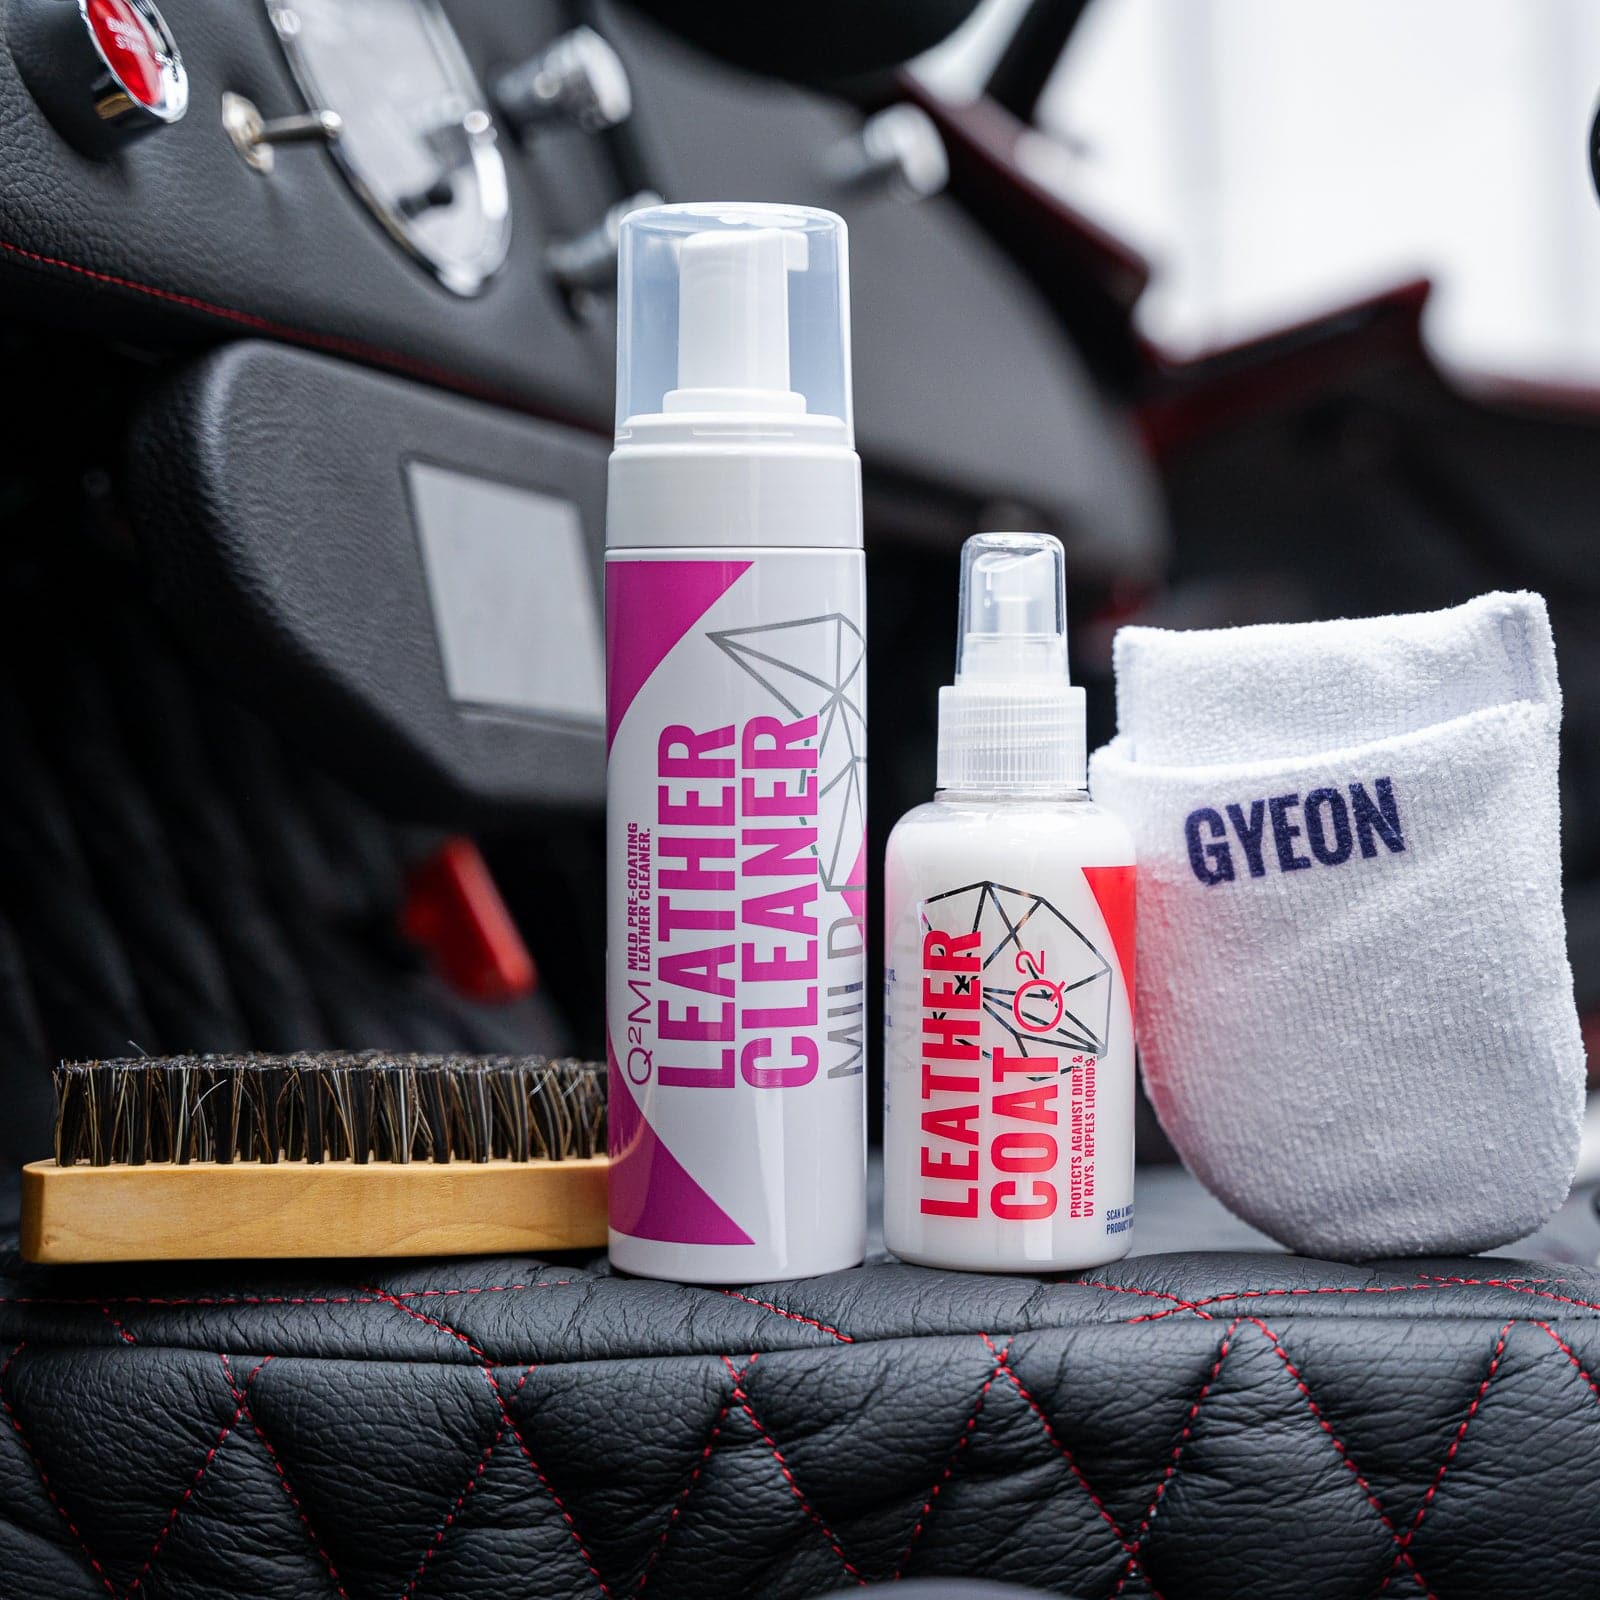 Gyeon Leather Cleaner Mild 400ml + Leather Shield Kit – Detailing